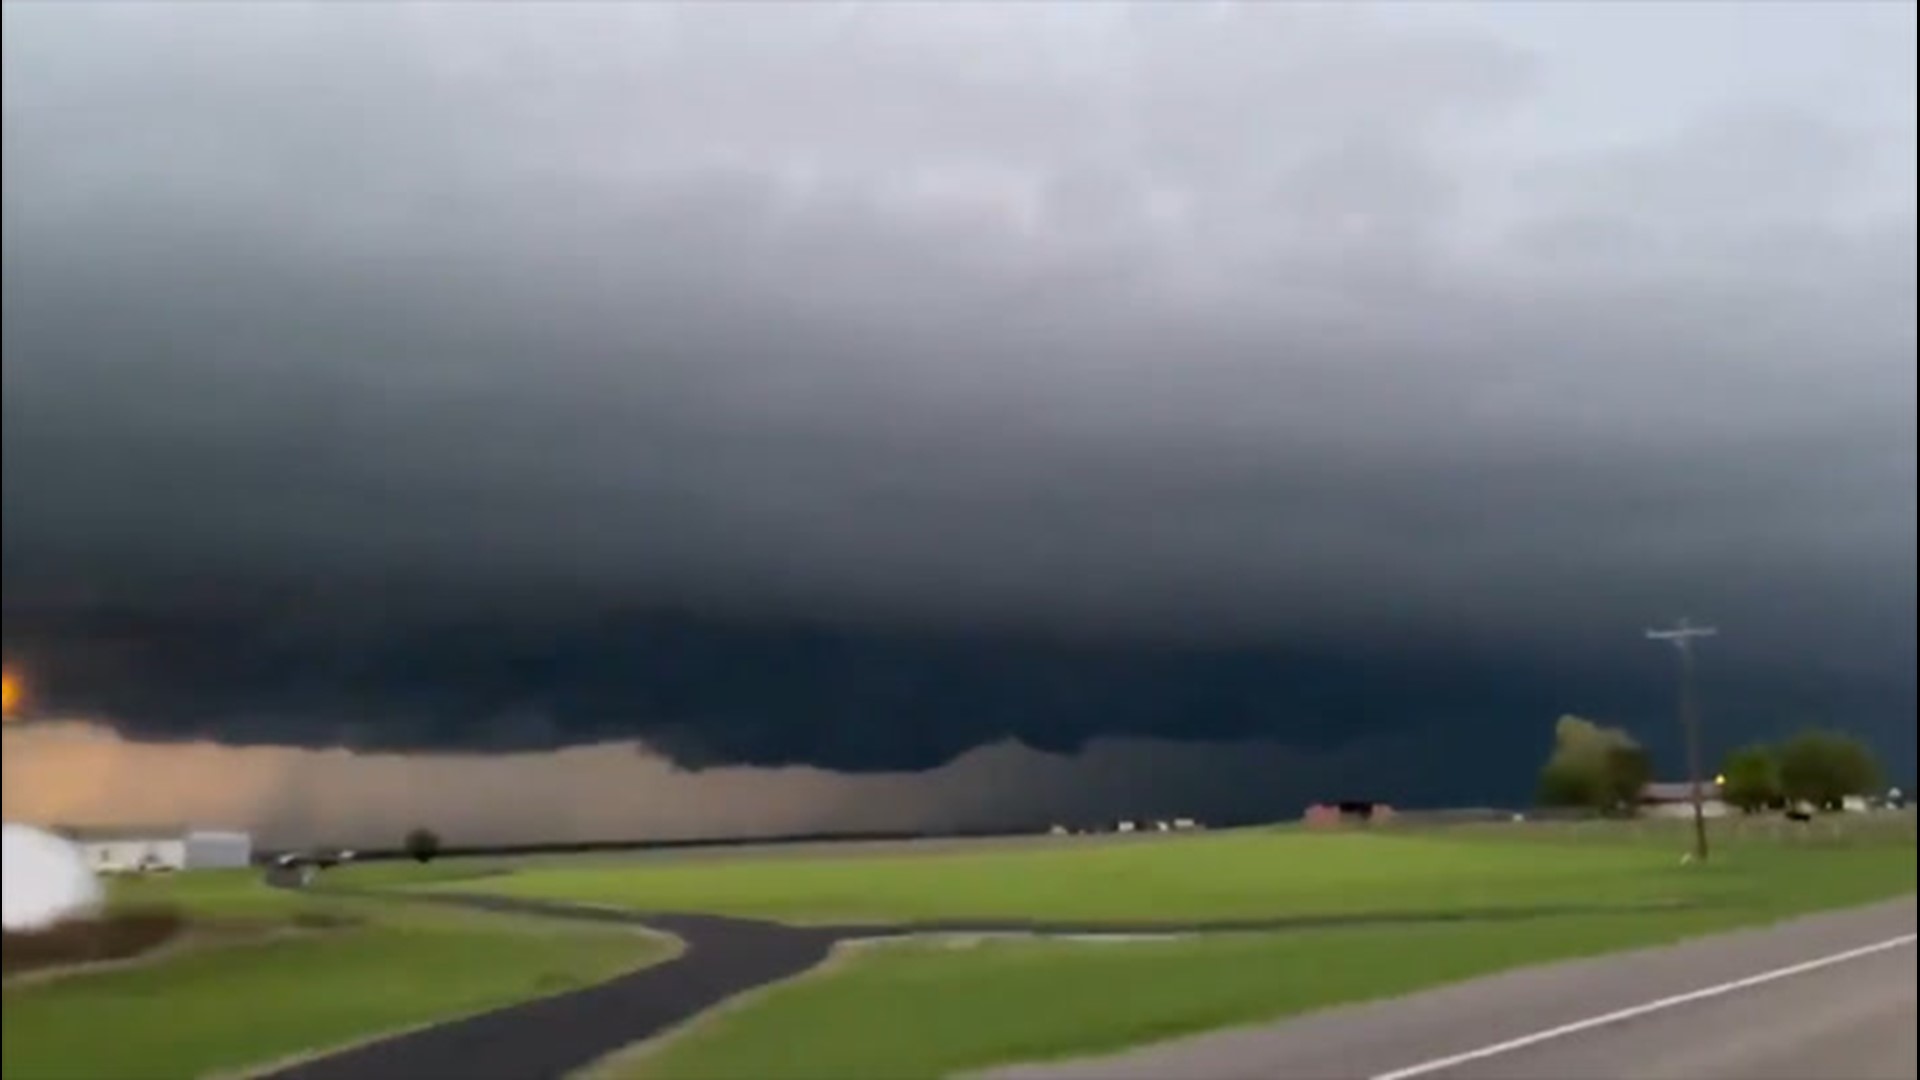 A massive shelf cloud floated above Vernon, Texas, on April 11, carrying a powerful storm with it.